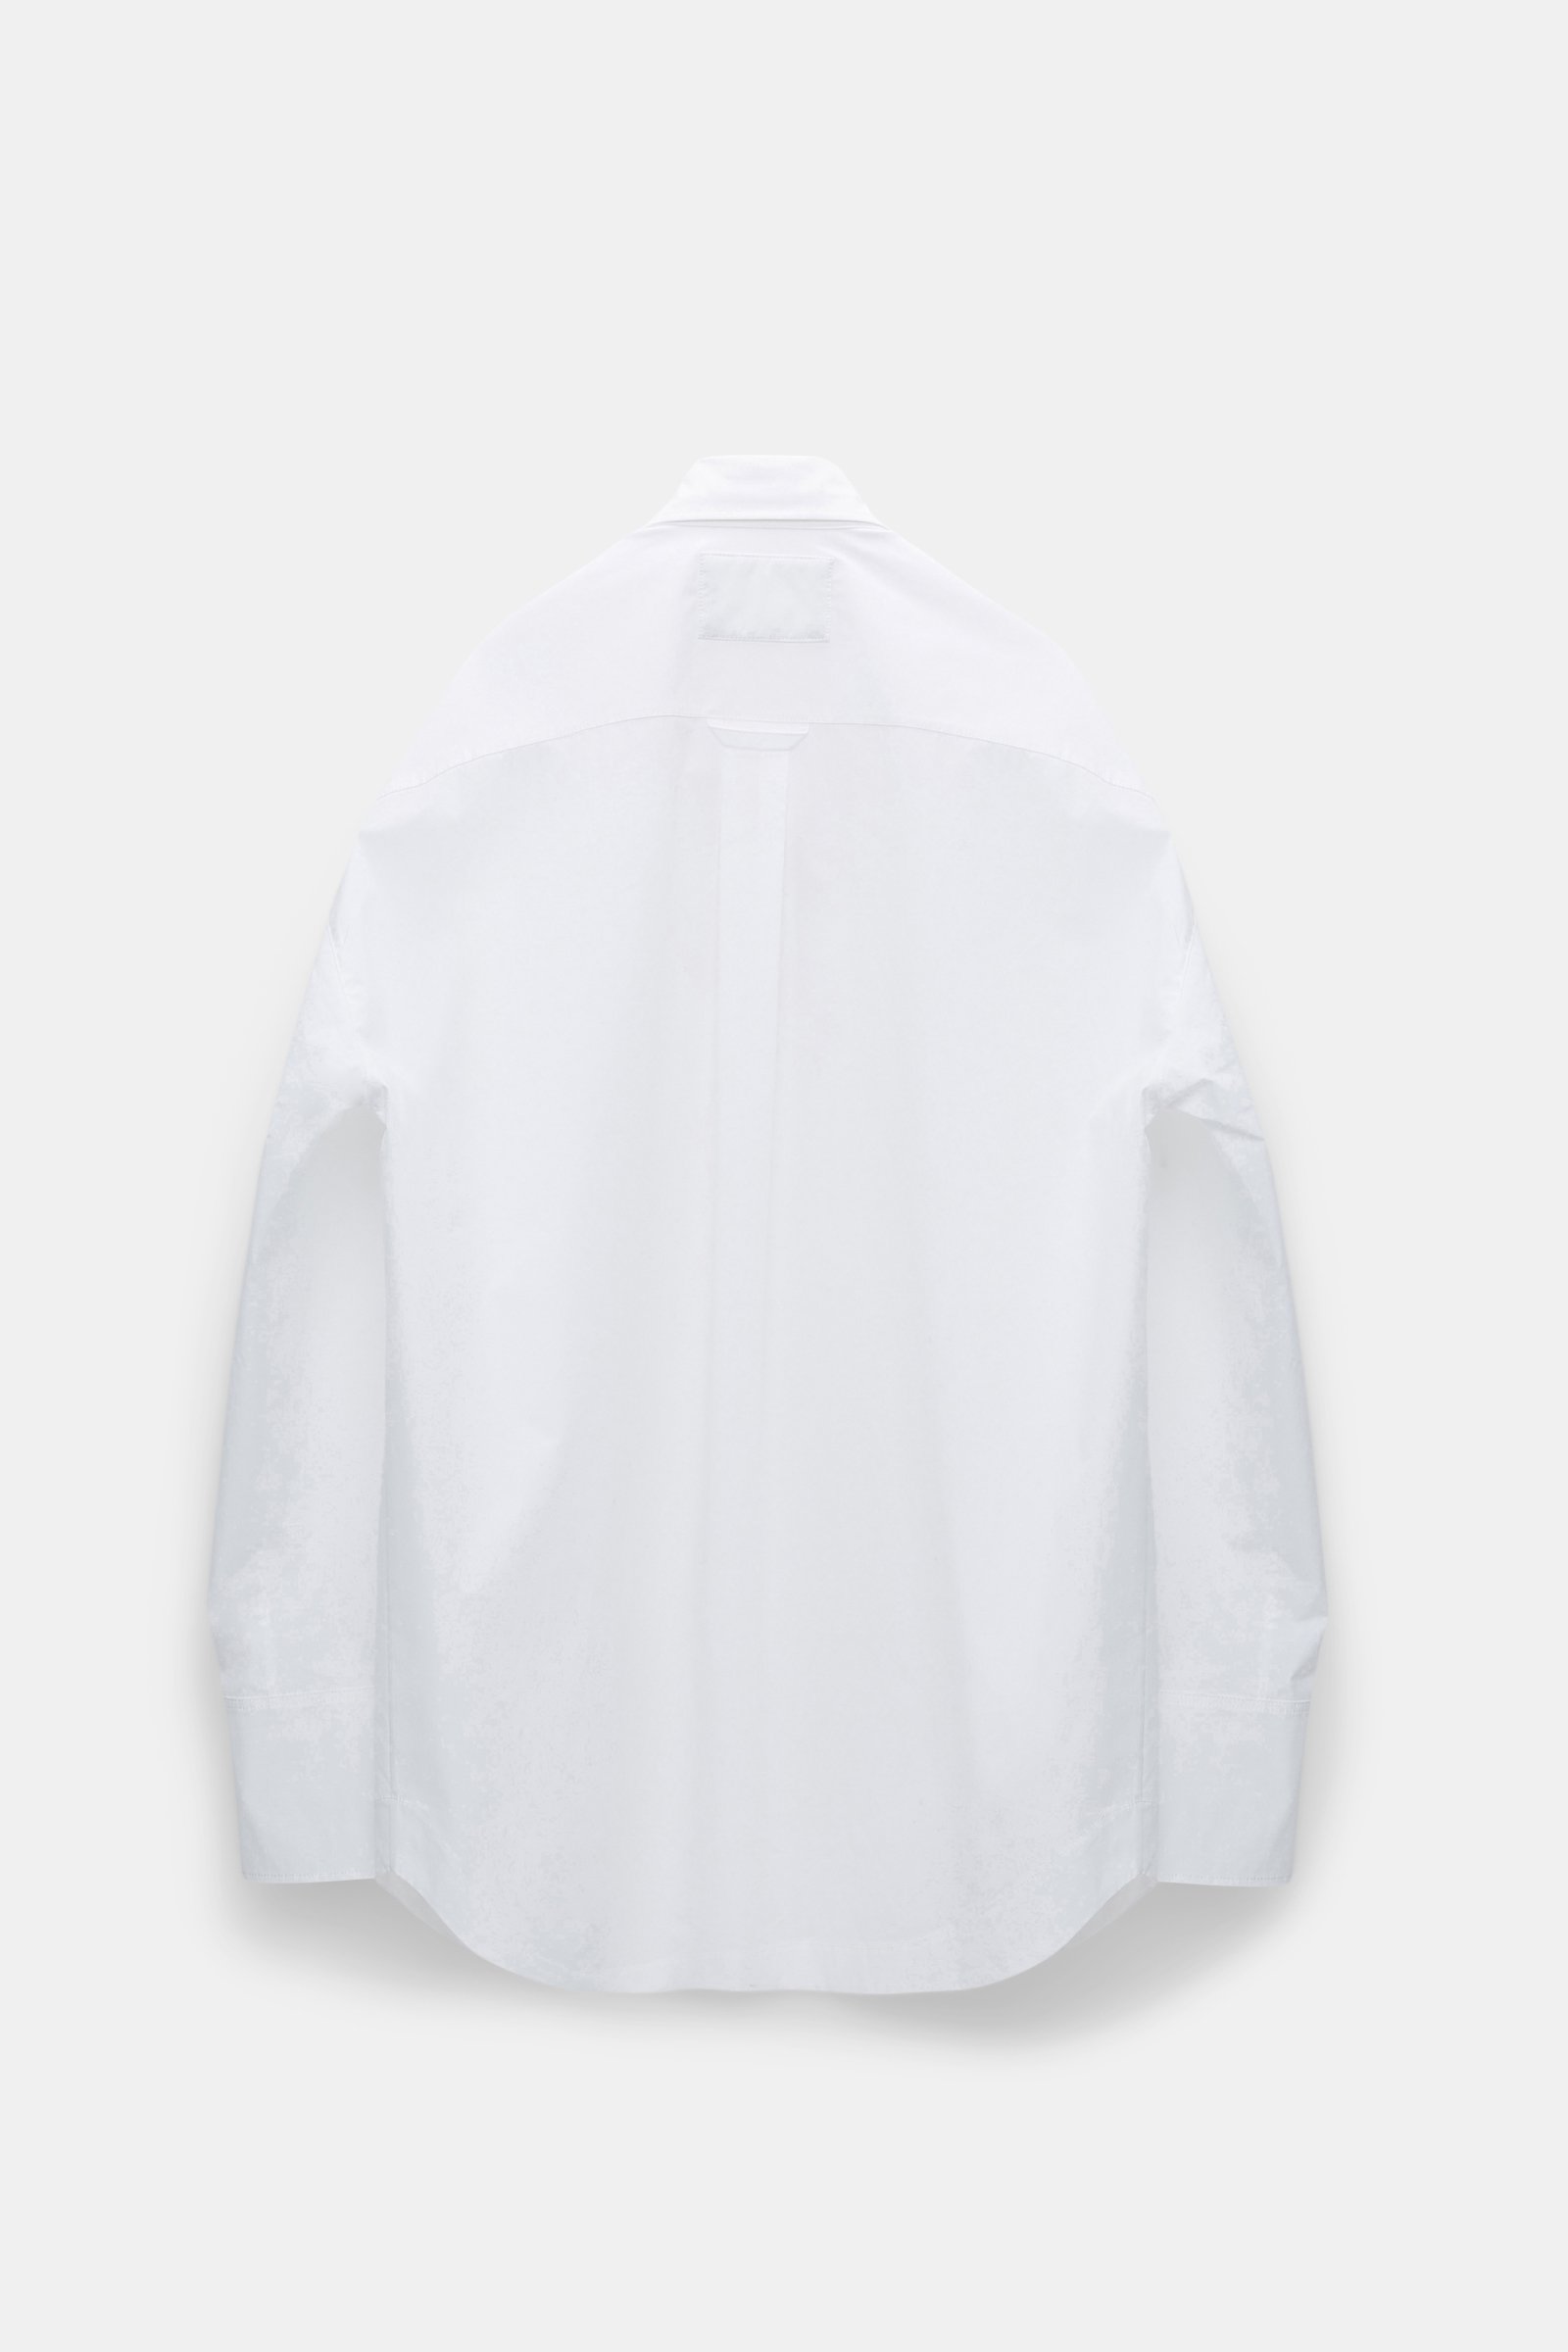 Dorothee Schumacher Oversized shirt in cotton poplin with patch pockets pure white